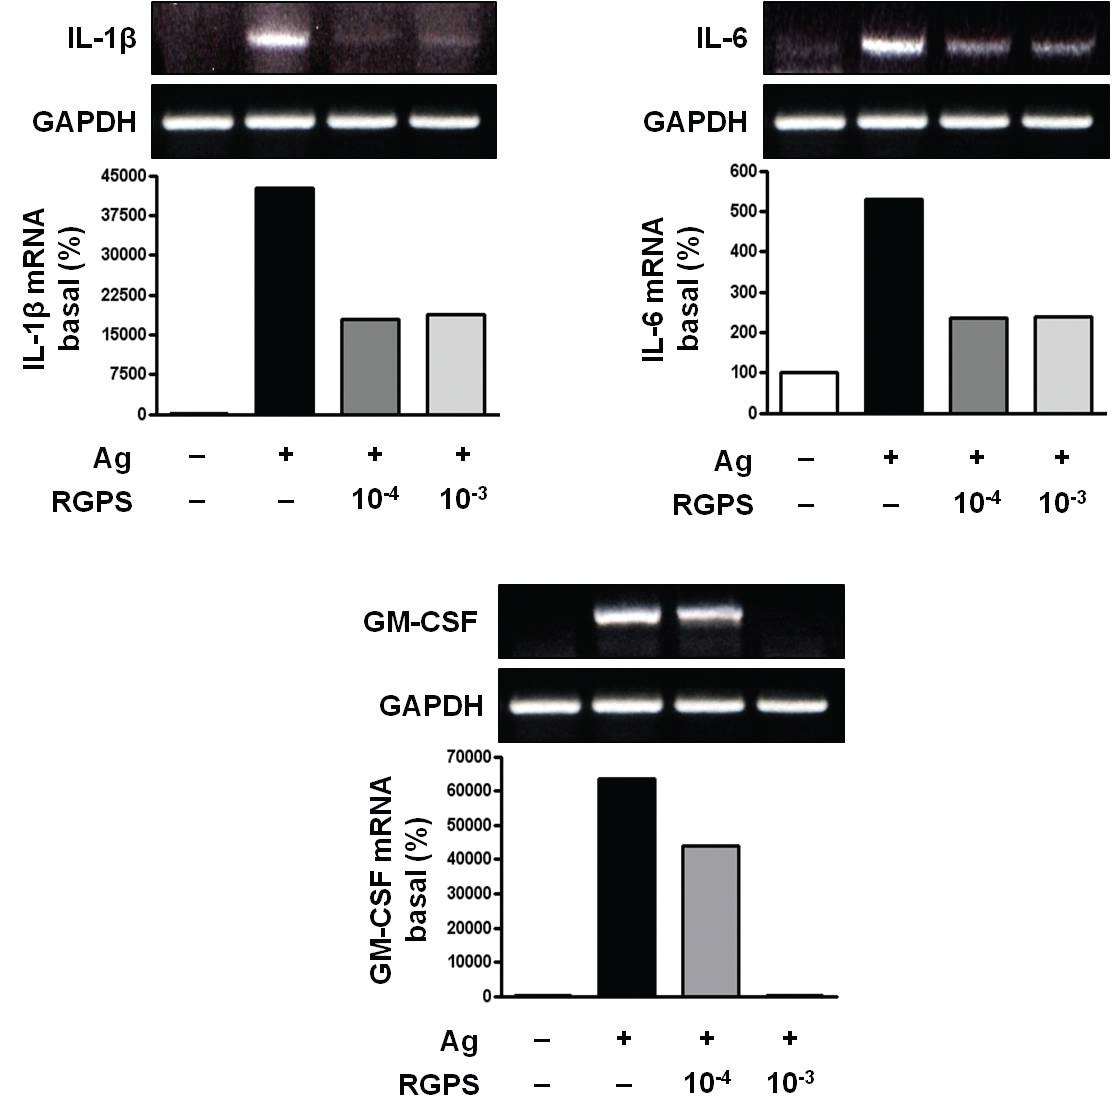 Effects of RGPS on the mRNA expression levels of IL-1β, IL-6 and GM-CSF in IgE/Ag-stimulated RBL-2H3 cells. IgE-sensitized cells were treated with RGPS (10-4 and 10-3 dilution) for 1 h and stimulated with DNP-HSA for 4 h. Detection of mRNA was examined by using RT-PCR analyses. GAPDH was used as an internal control gene.